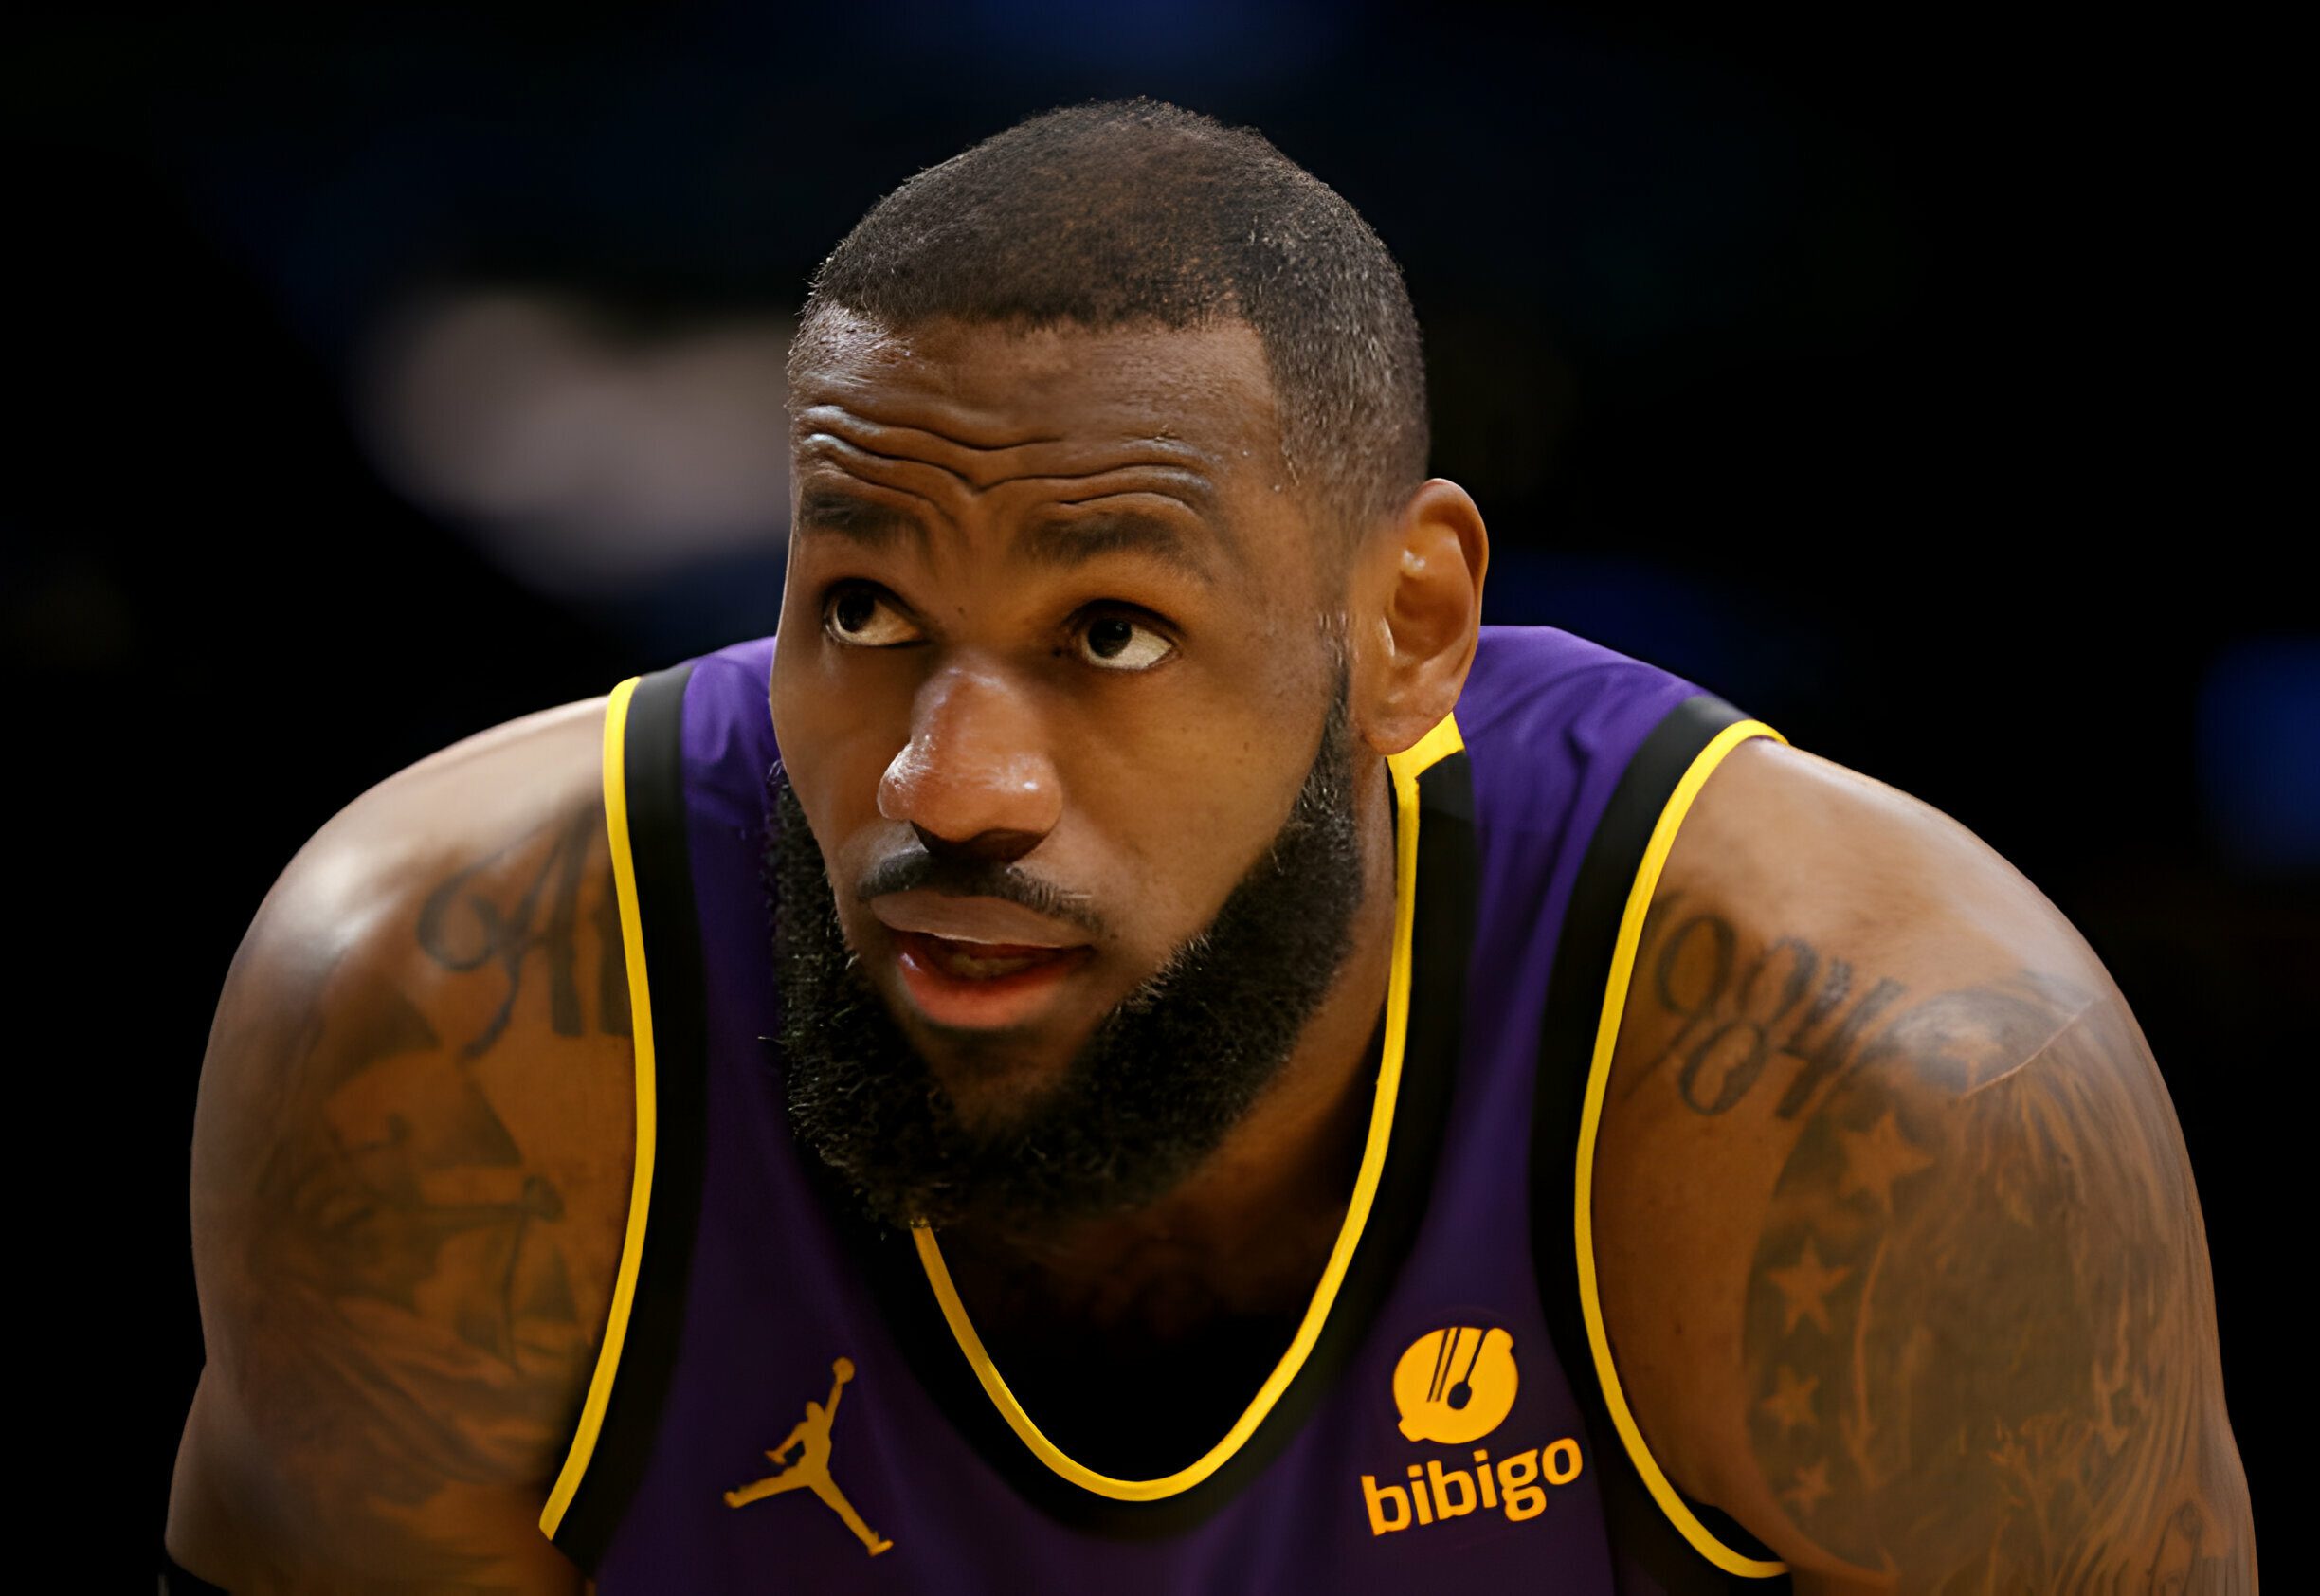 Los Angeles, CA - Lakers star LeBron James at the foul line during a game against the Grizzlies at Crypto.com Arena in Los Angeles on Friday night, Jan. 5, 2024. Memphis won, 127-113. (Luis Sinco / Los Angeles Times via Getty Images)